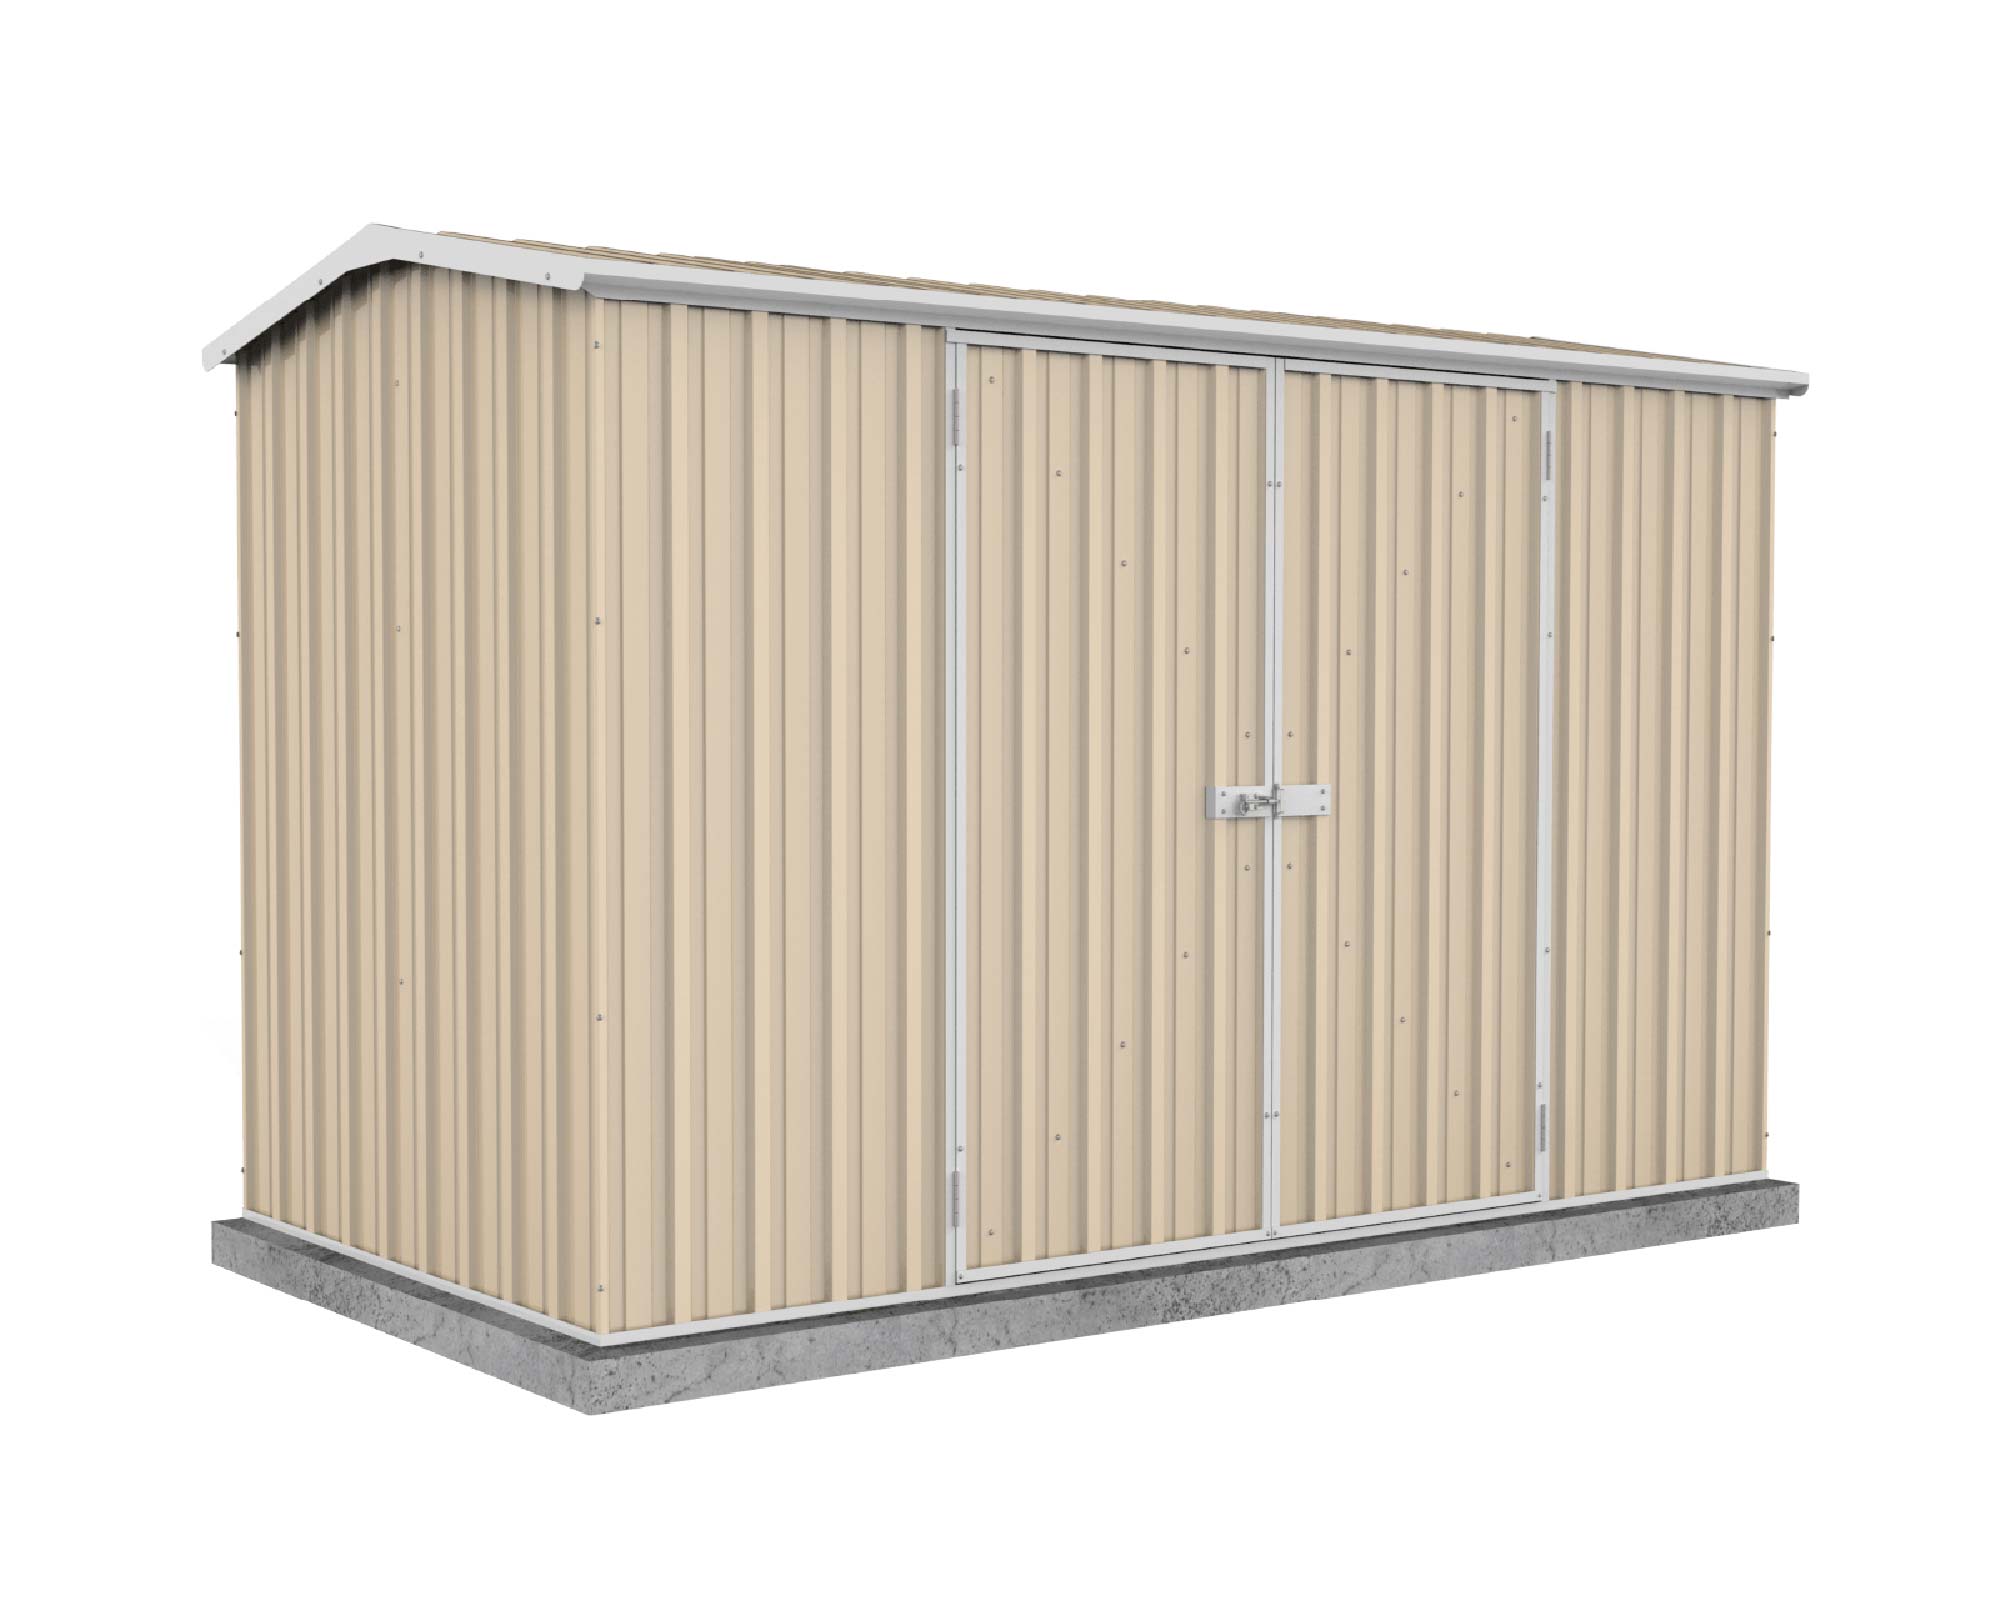 Premier Garden Shed with Double Doors Kit 3m x 1.52m x 1.95m in Classic Cream